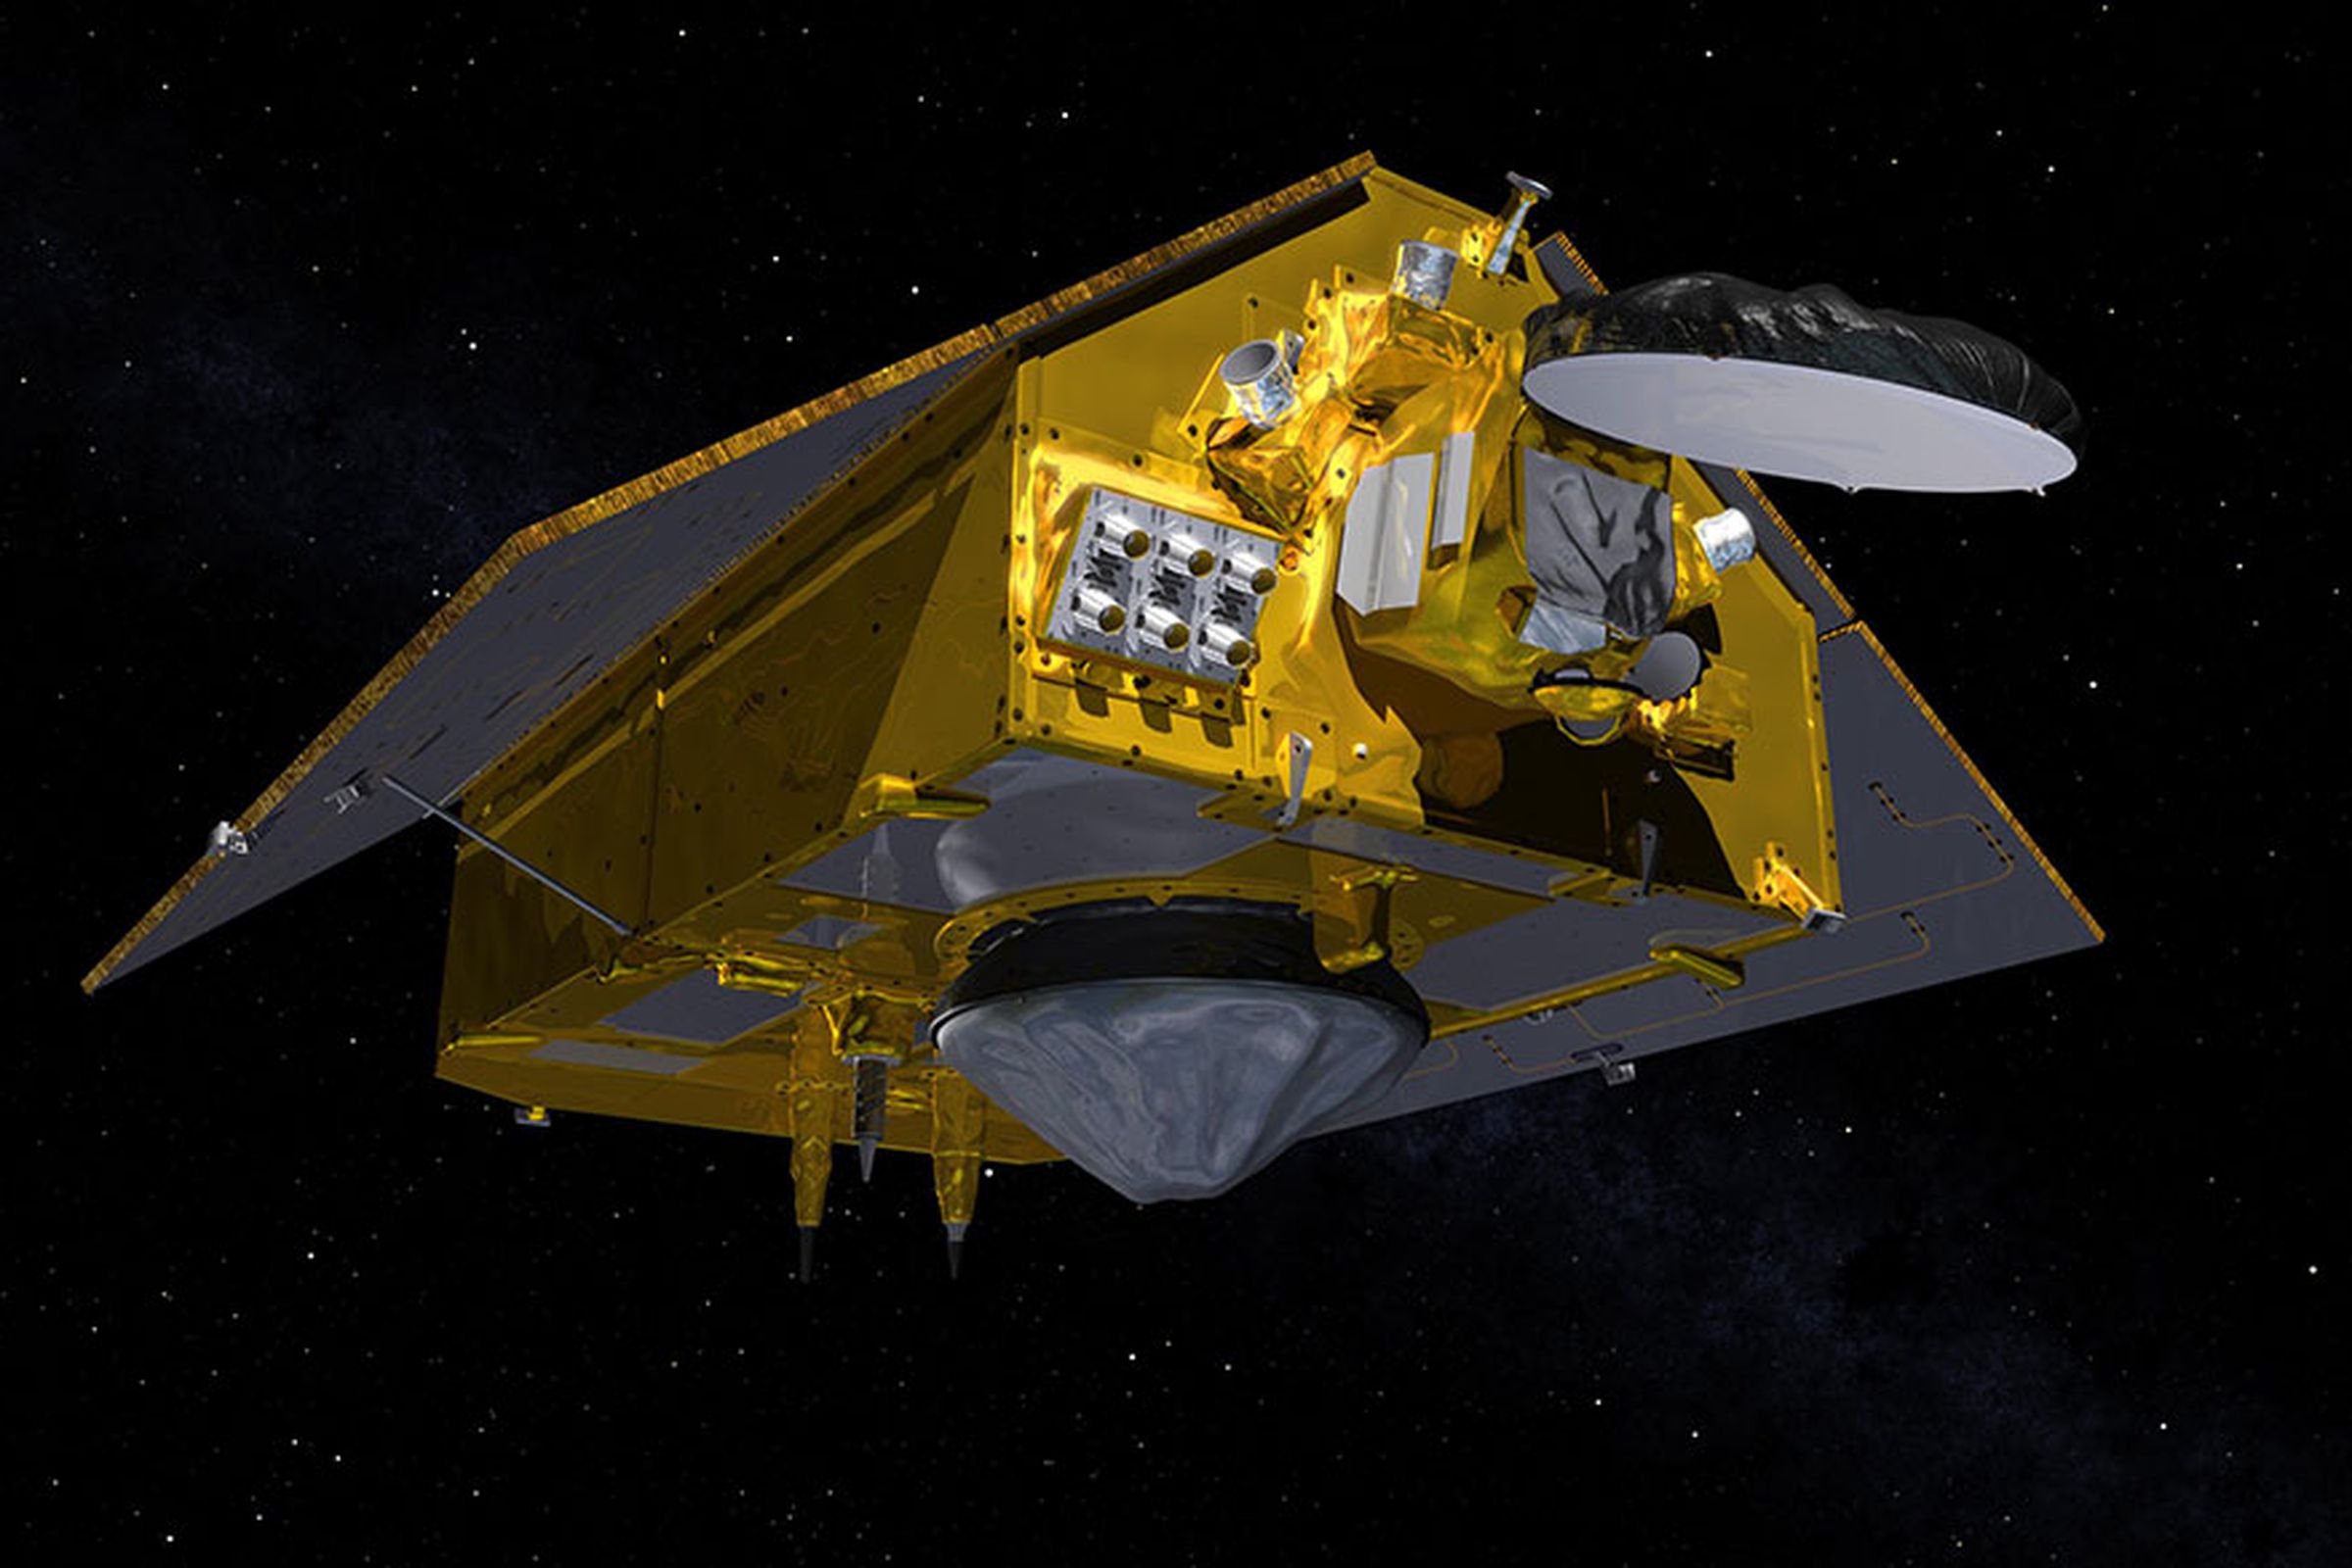 This illustration shows the rear of the Sentinel-6 Michael Freilich spacecraft in orbit above Earth with its deployable solar panels extended. As the world’s latest ocean-monitoring satellite, it is launching on Nov. 21, 2020, to collect the most accurate data yet on global sea level and how our oceans are rising in response to climate change.&nbsp;